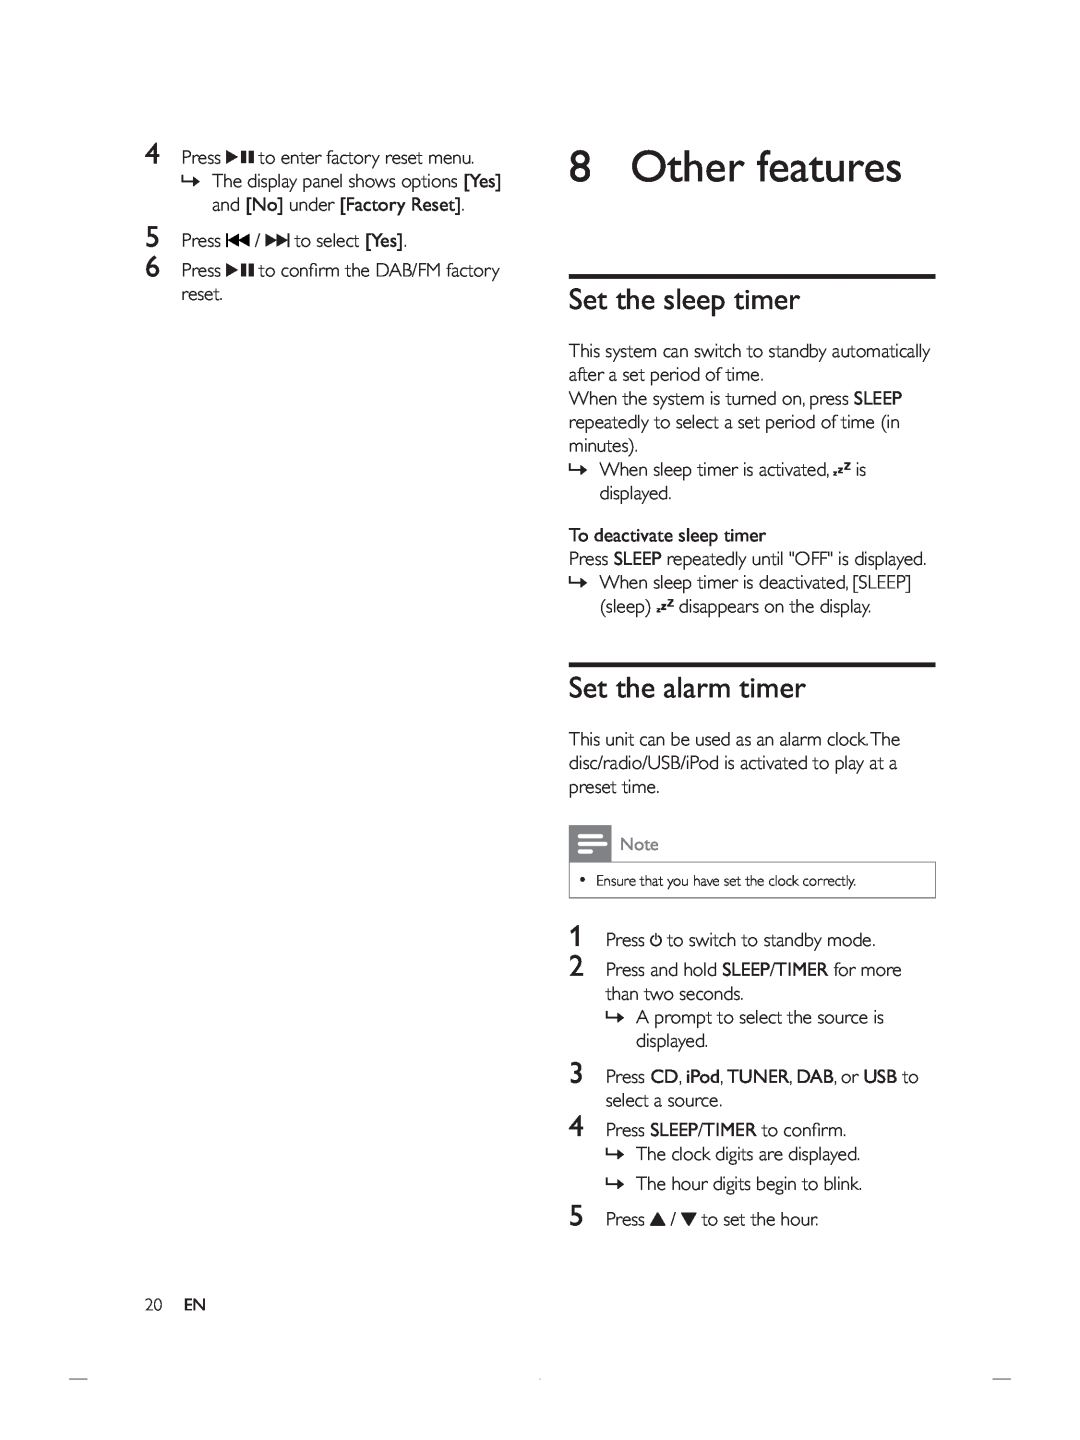 Philips DCB852 user manual Other features, Set the sleep timer, Set the alarm timer 